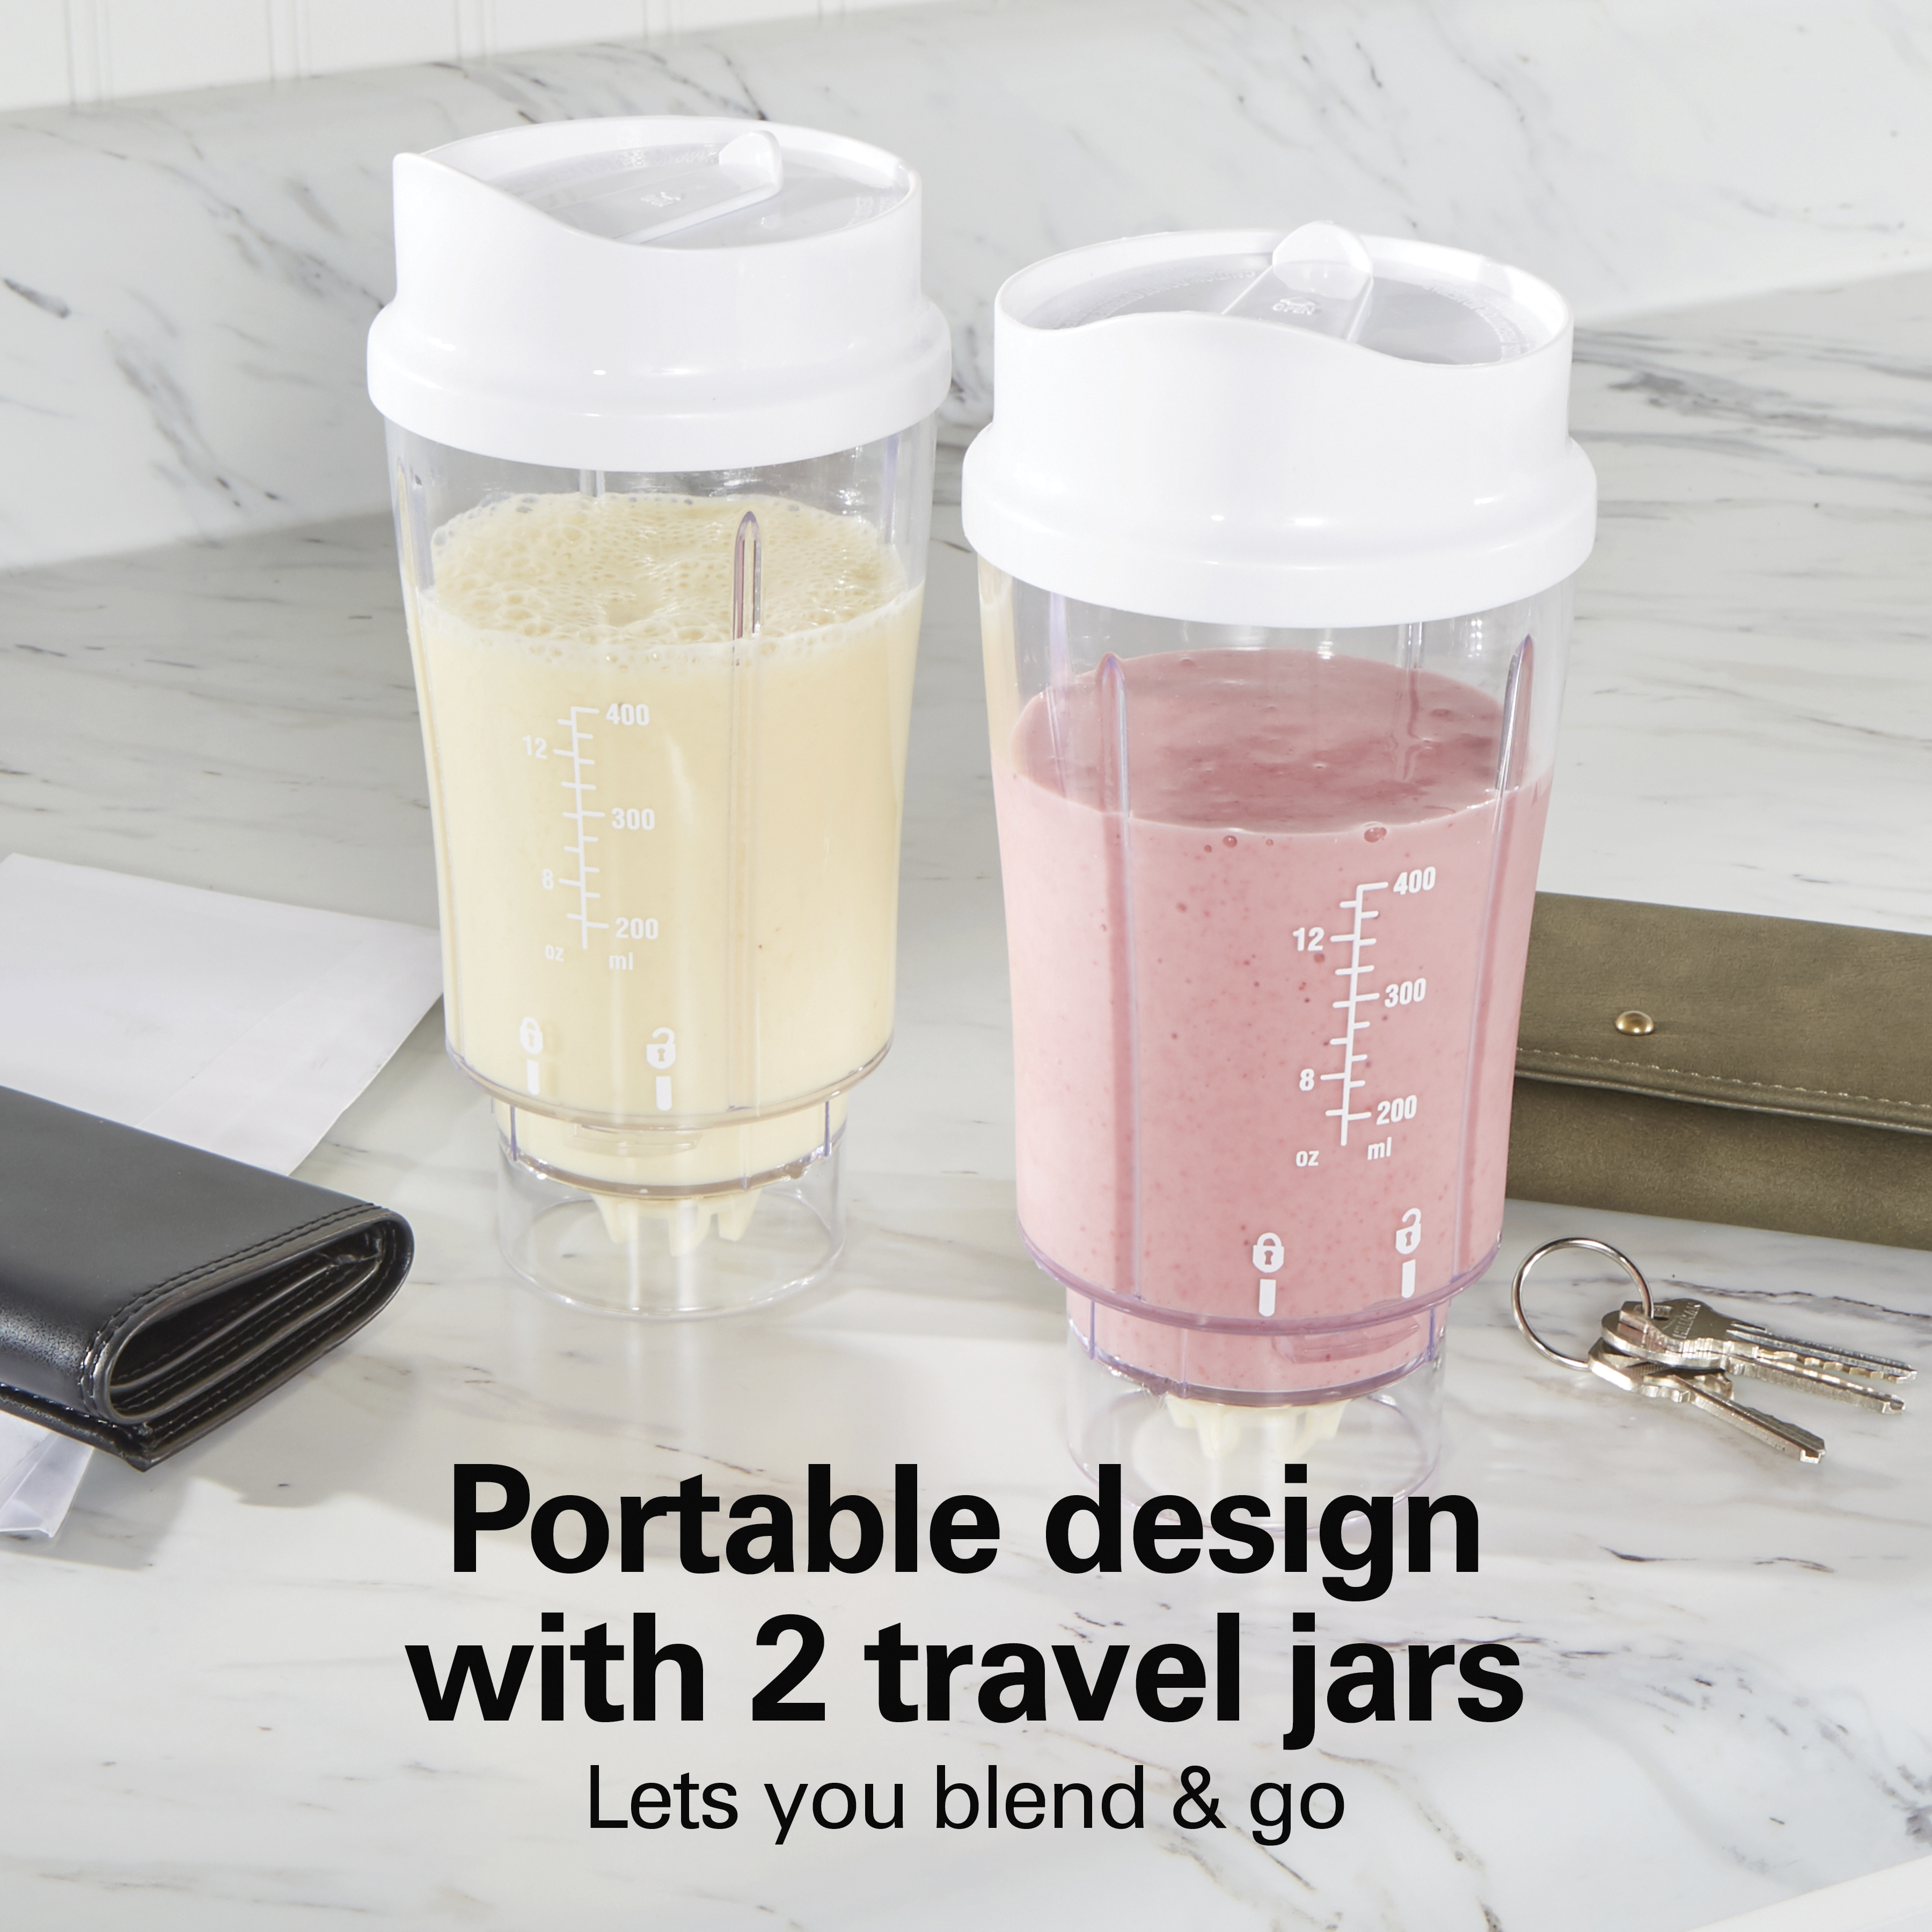 Hamilton Beach Smoothie Blender with 2 Travel Jars and 2 Lids, White 51102V - image 5 of 8